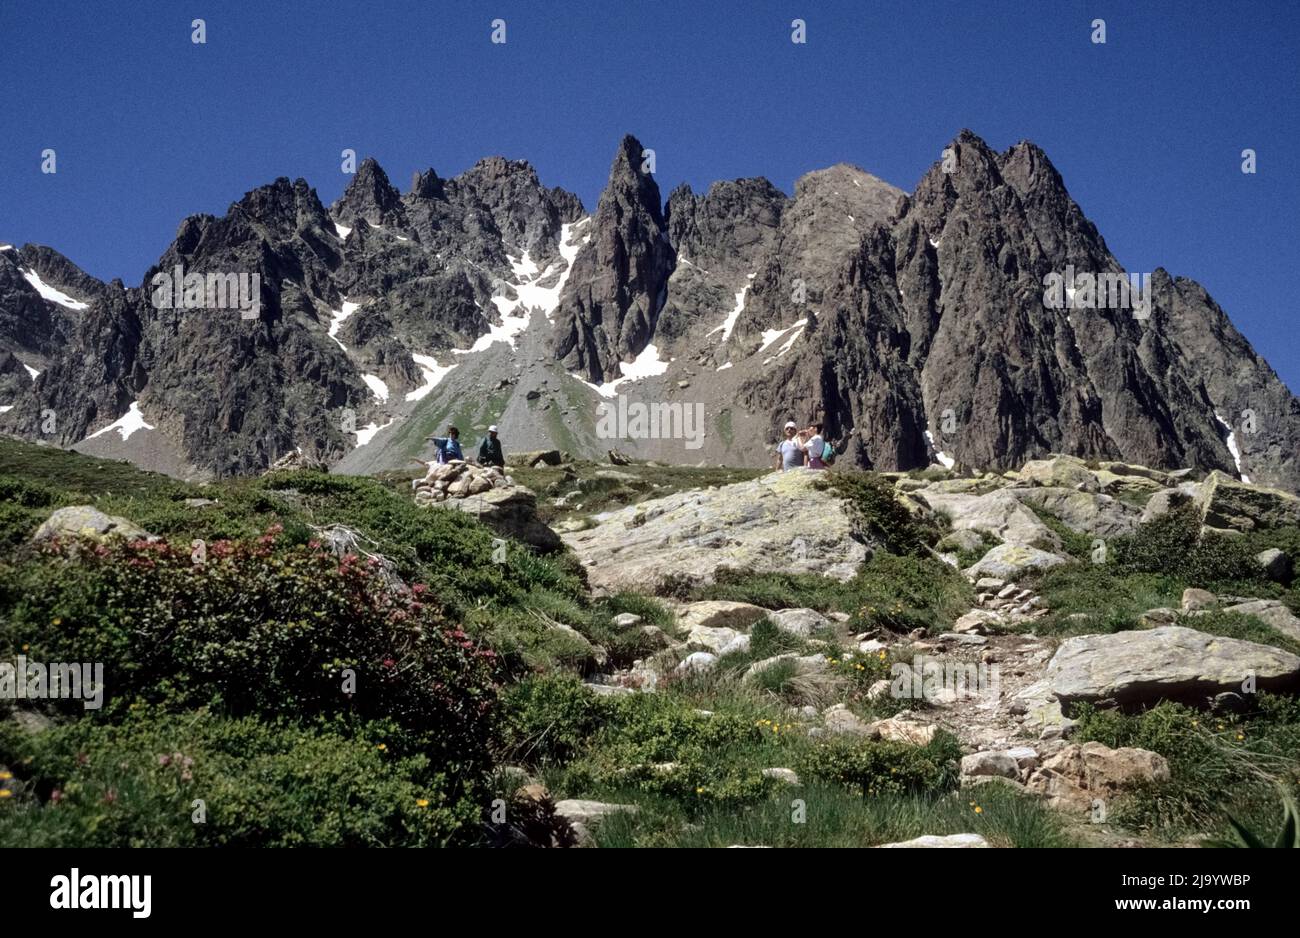 On the 'Tour du Mont Blanc' long-distance hiking trail, with the mountains of the Mont Blanc Massif.  1990 Stock Photo